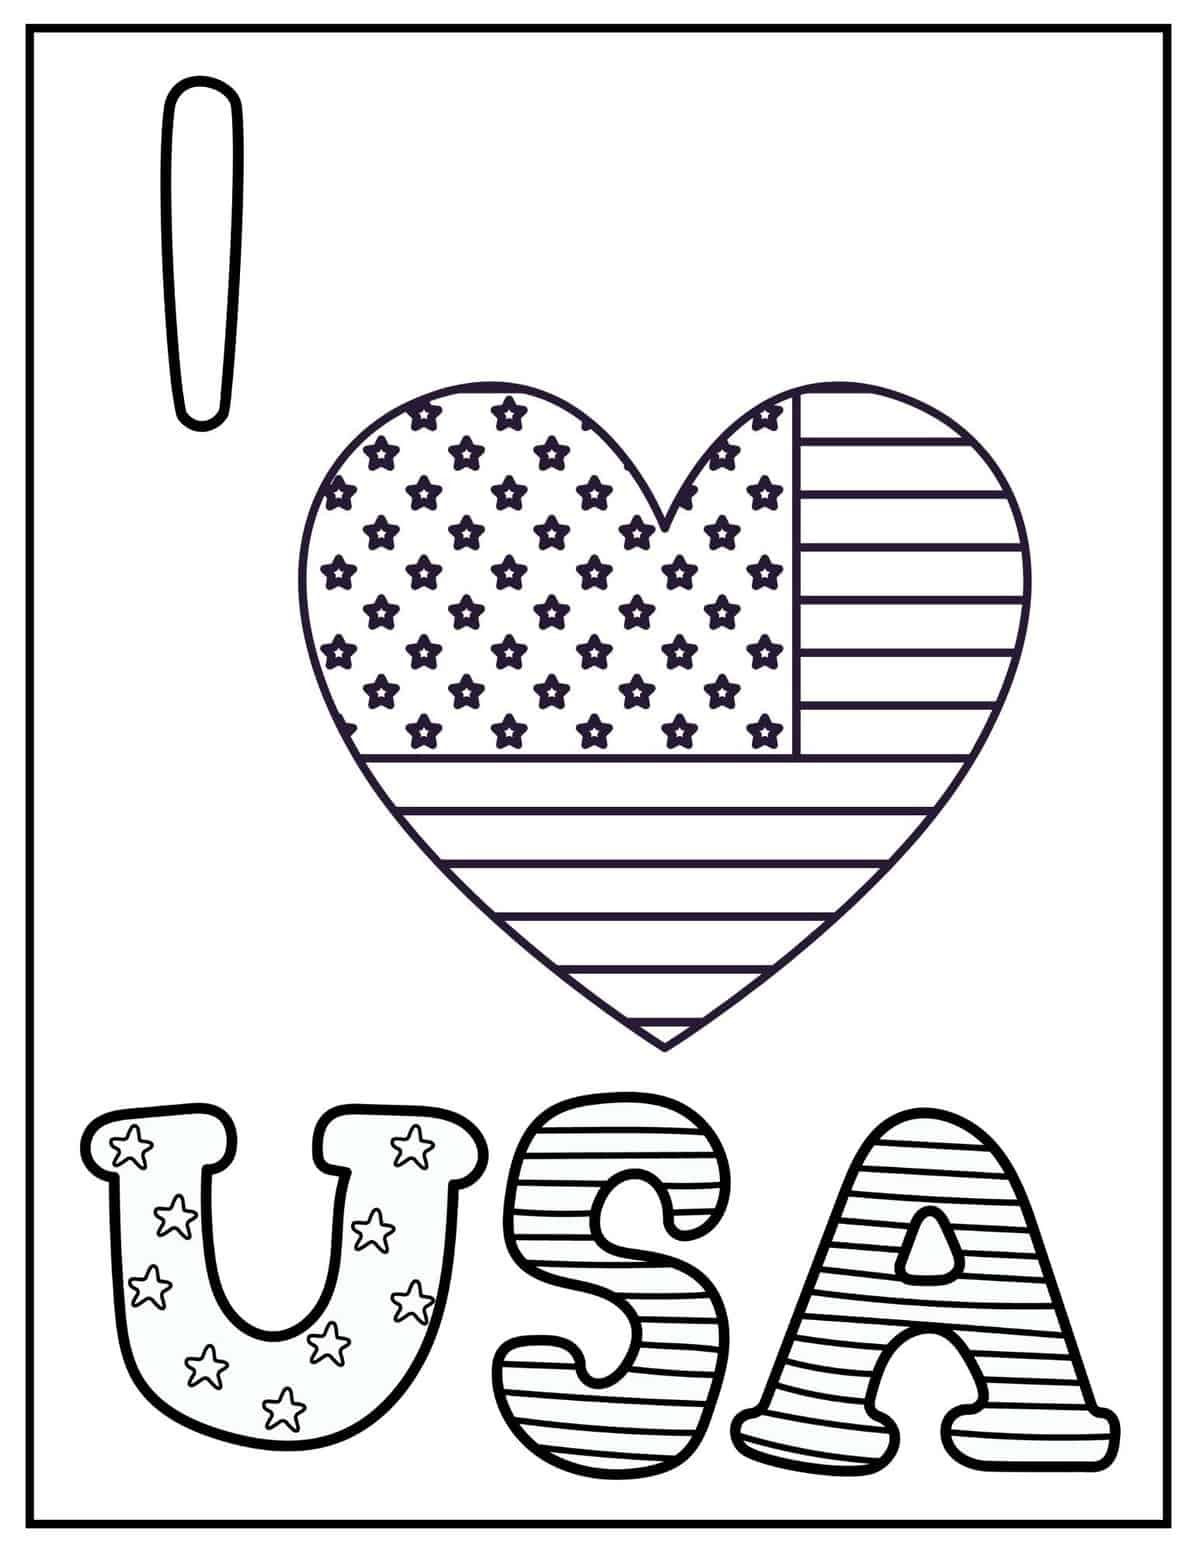 I heart USA coloring page